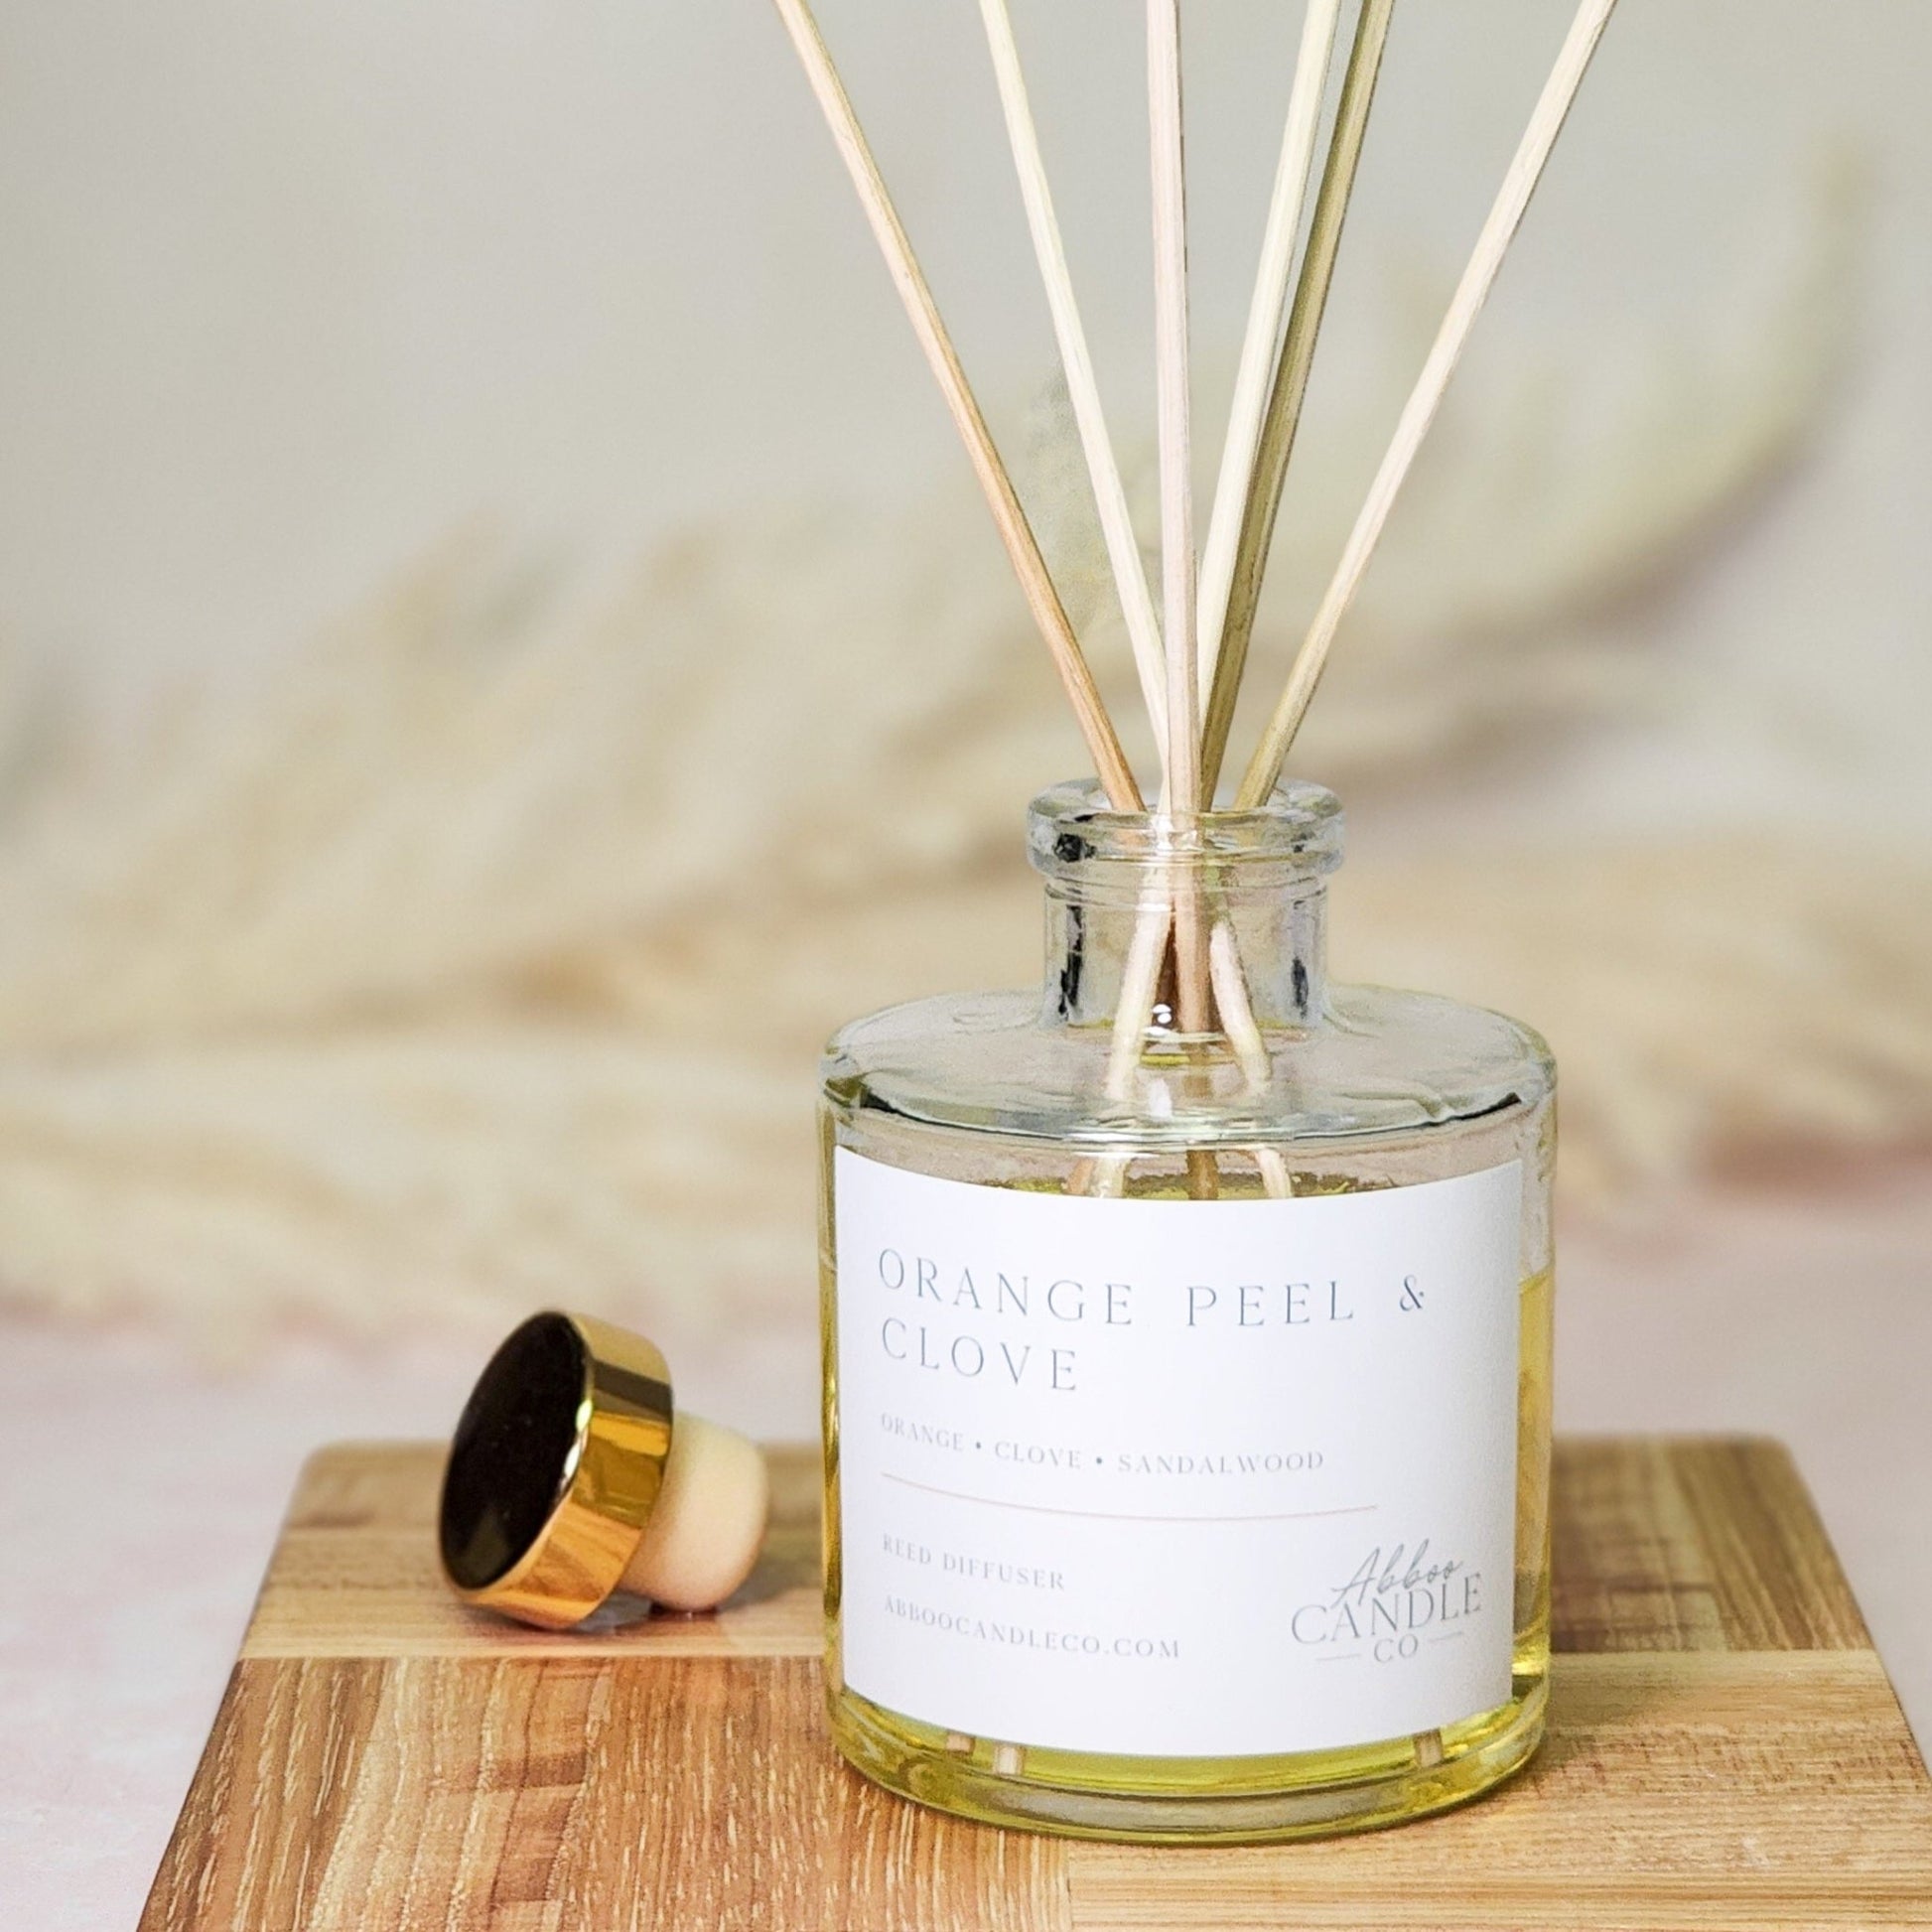 Orange Peel and Clove Reed Diffuser - Abboo Candle Co